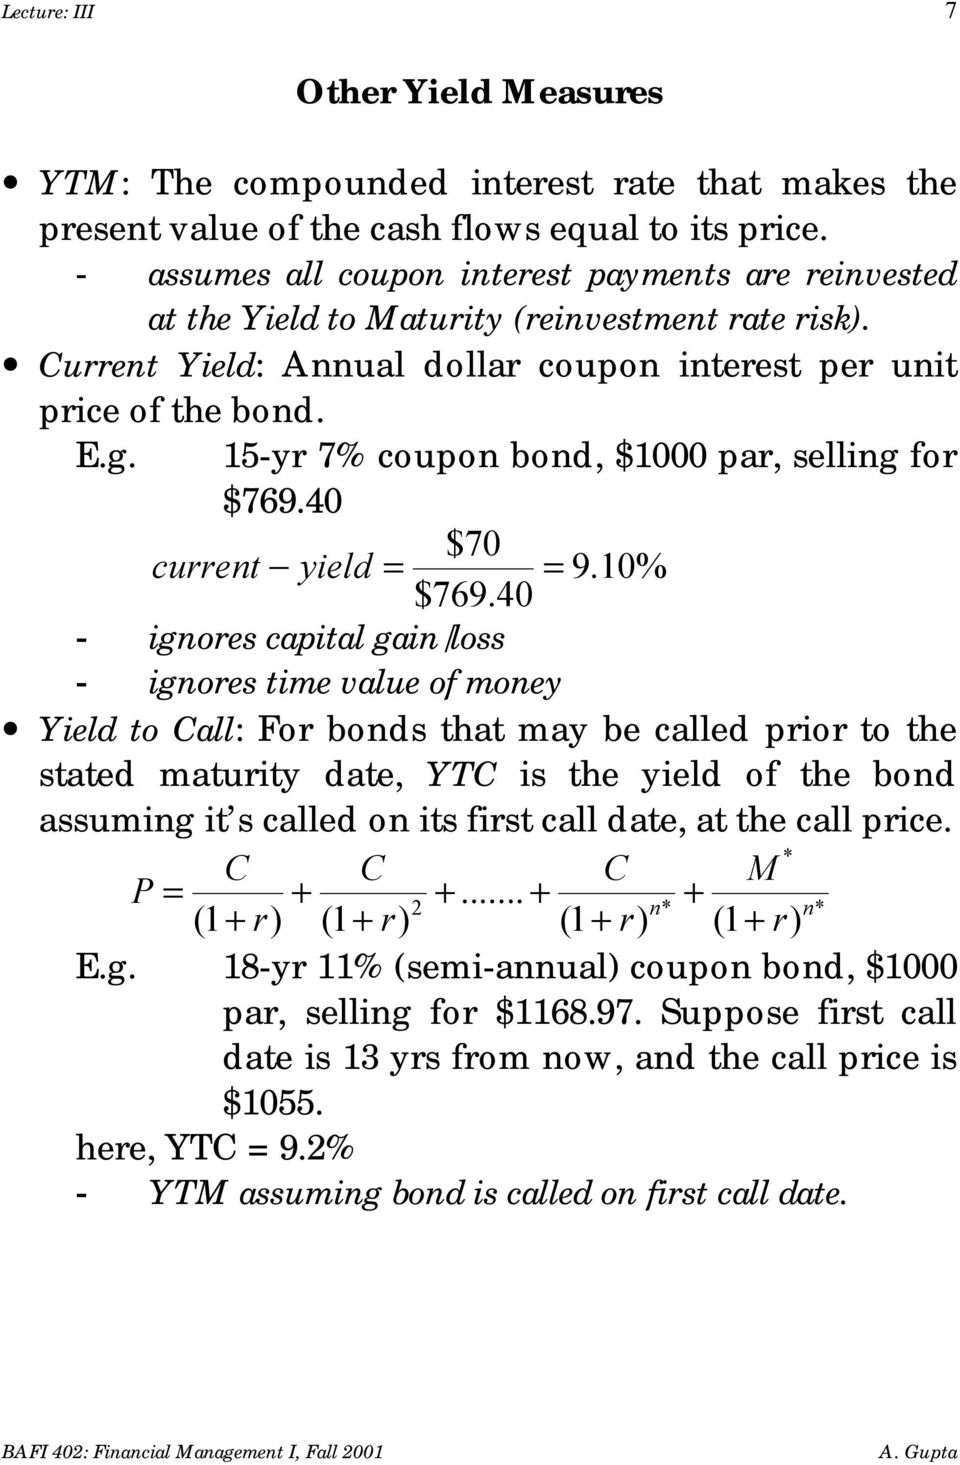 15-yr 7% coupon bond, $1000 par, selling for $769.40 current yield = $70 $769.40 = 9.